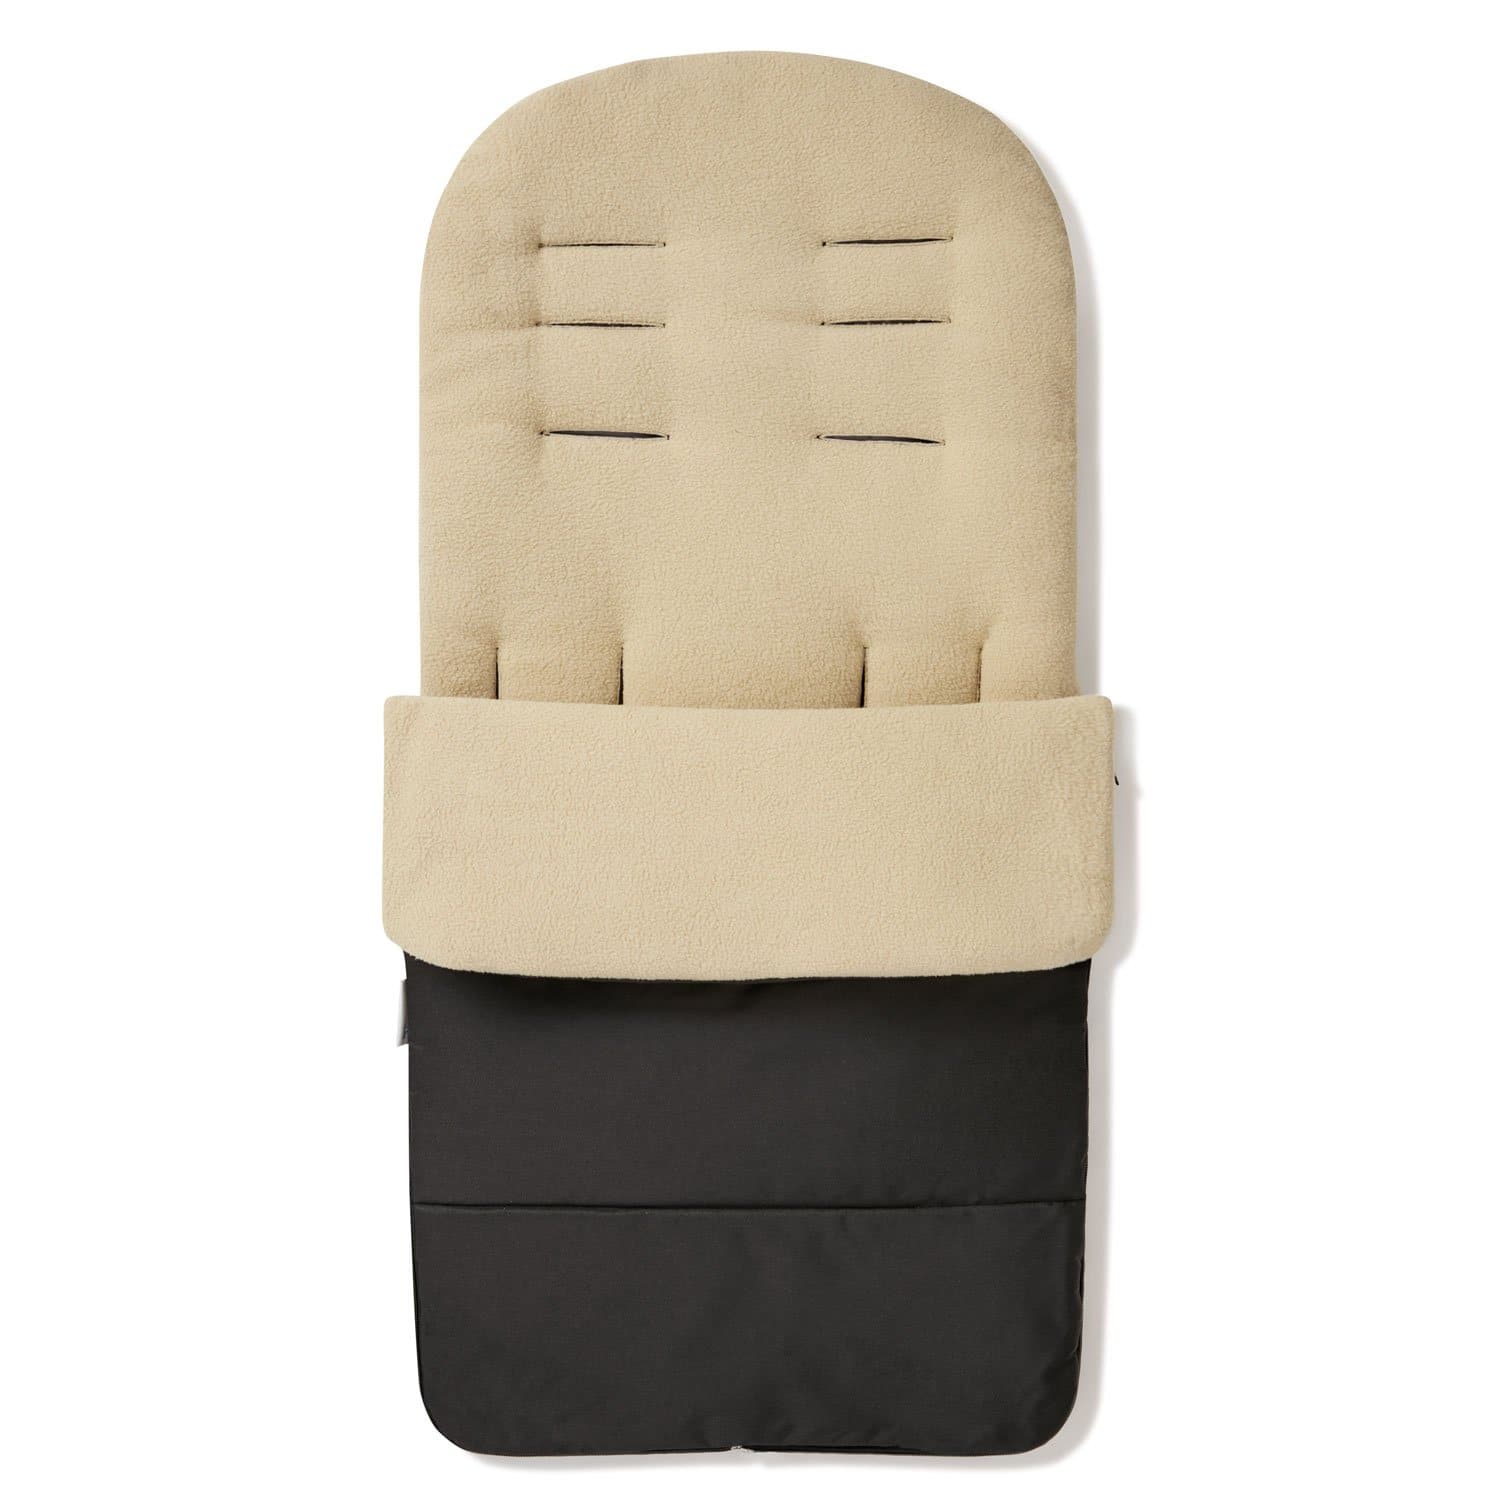 Premium Footmuff / Cosy Toes Compatible with Firstwheels - Desert Sand / Fits All Models | For Your Little One